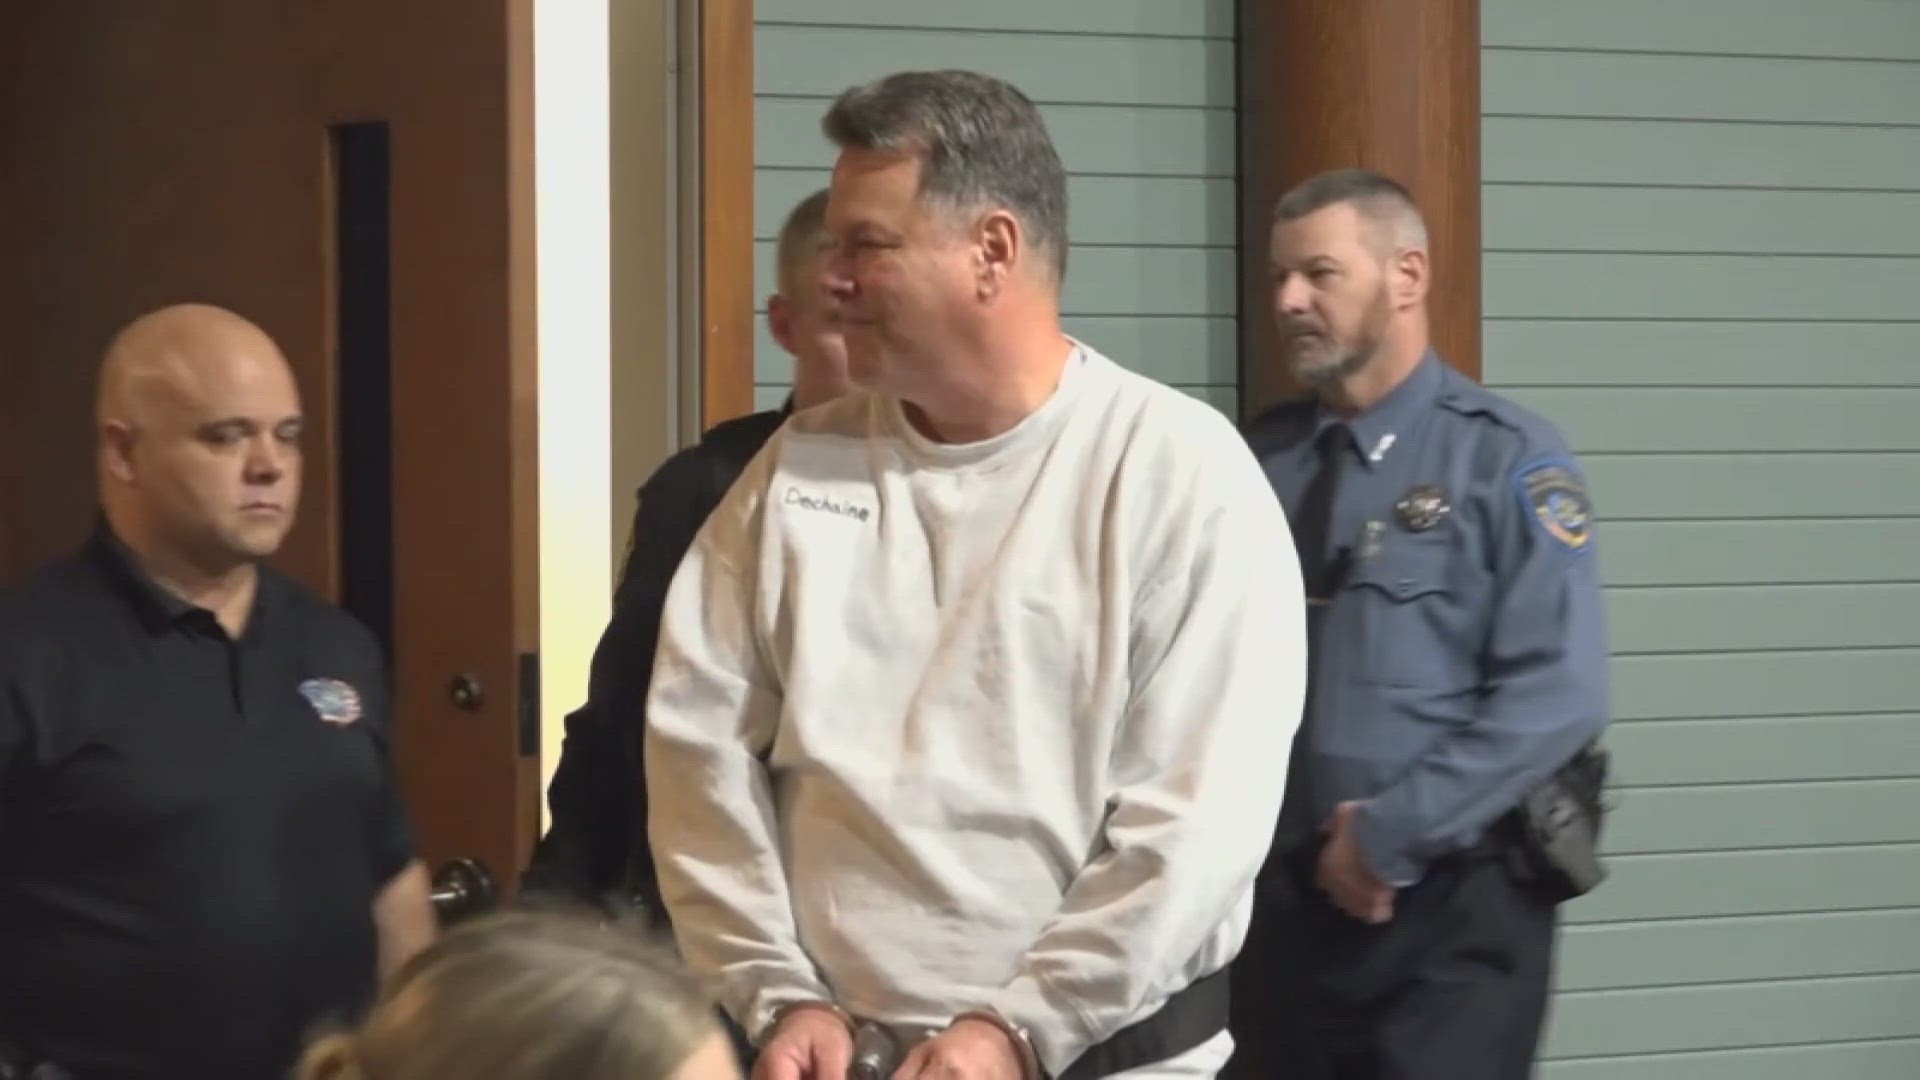 Dennis Dechaine, convicted in 1989 of killing Sarah Cherry in Bowdoin, seeks new trial